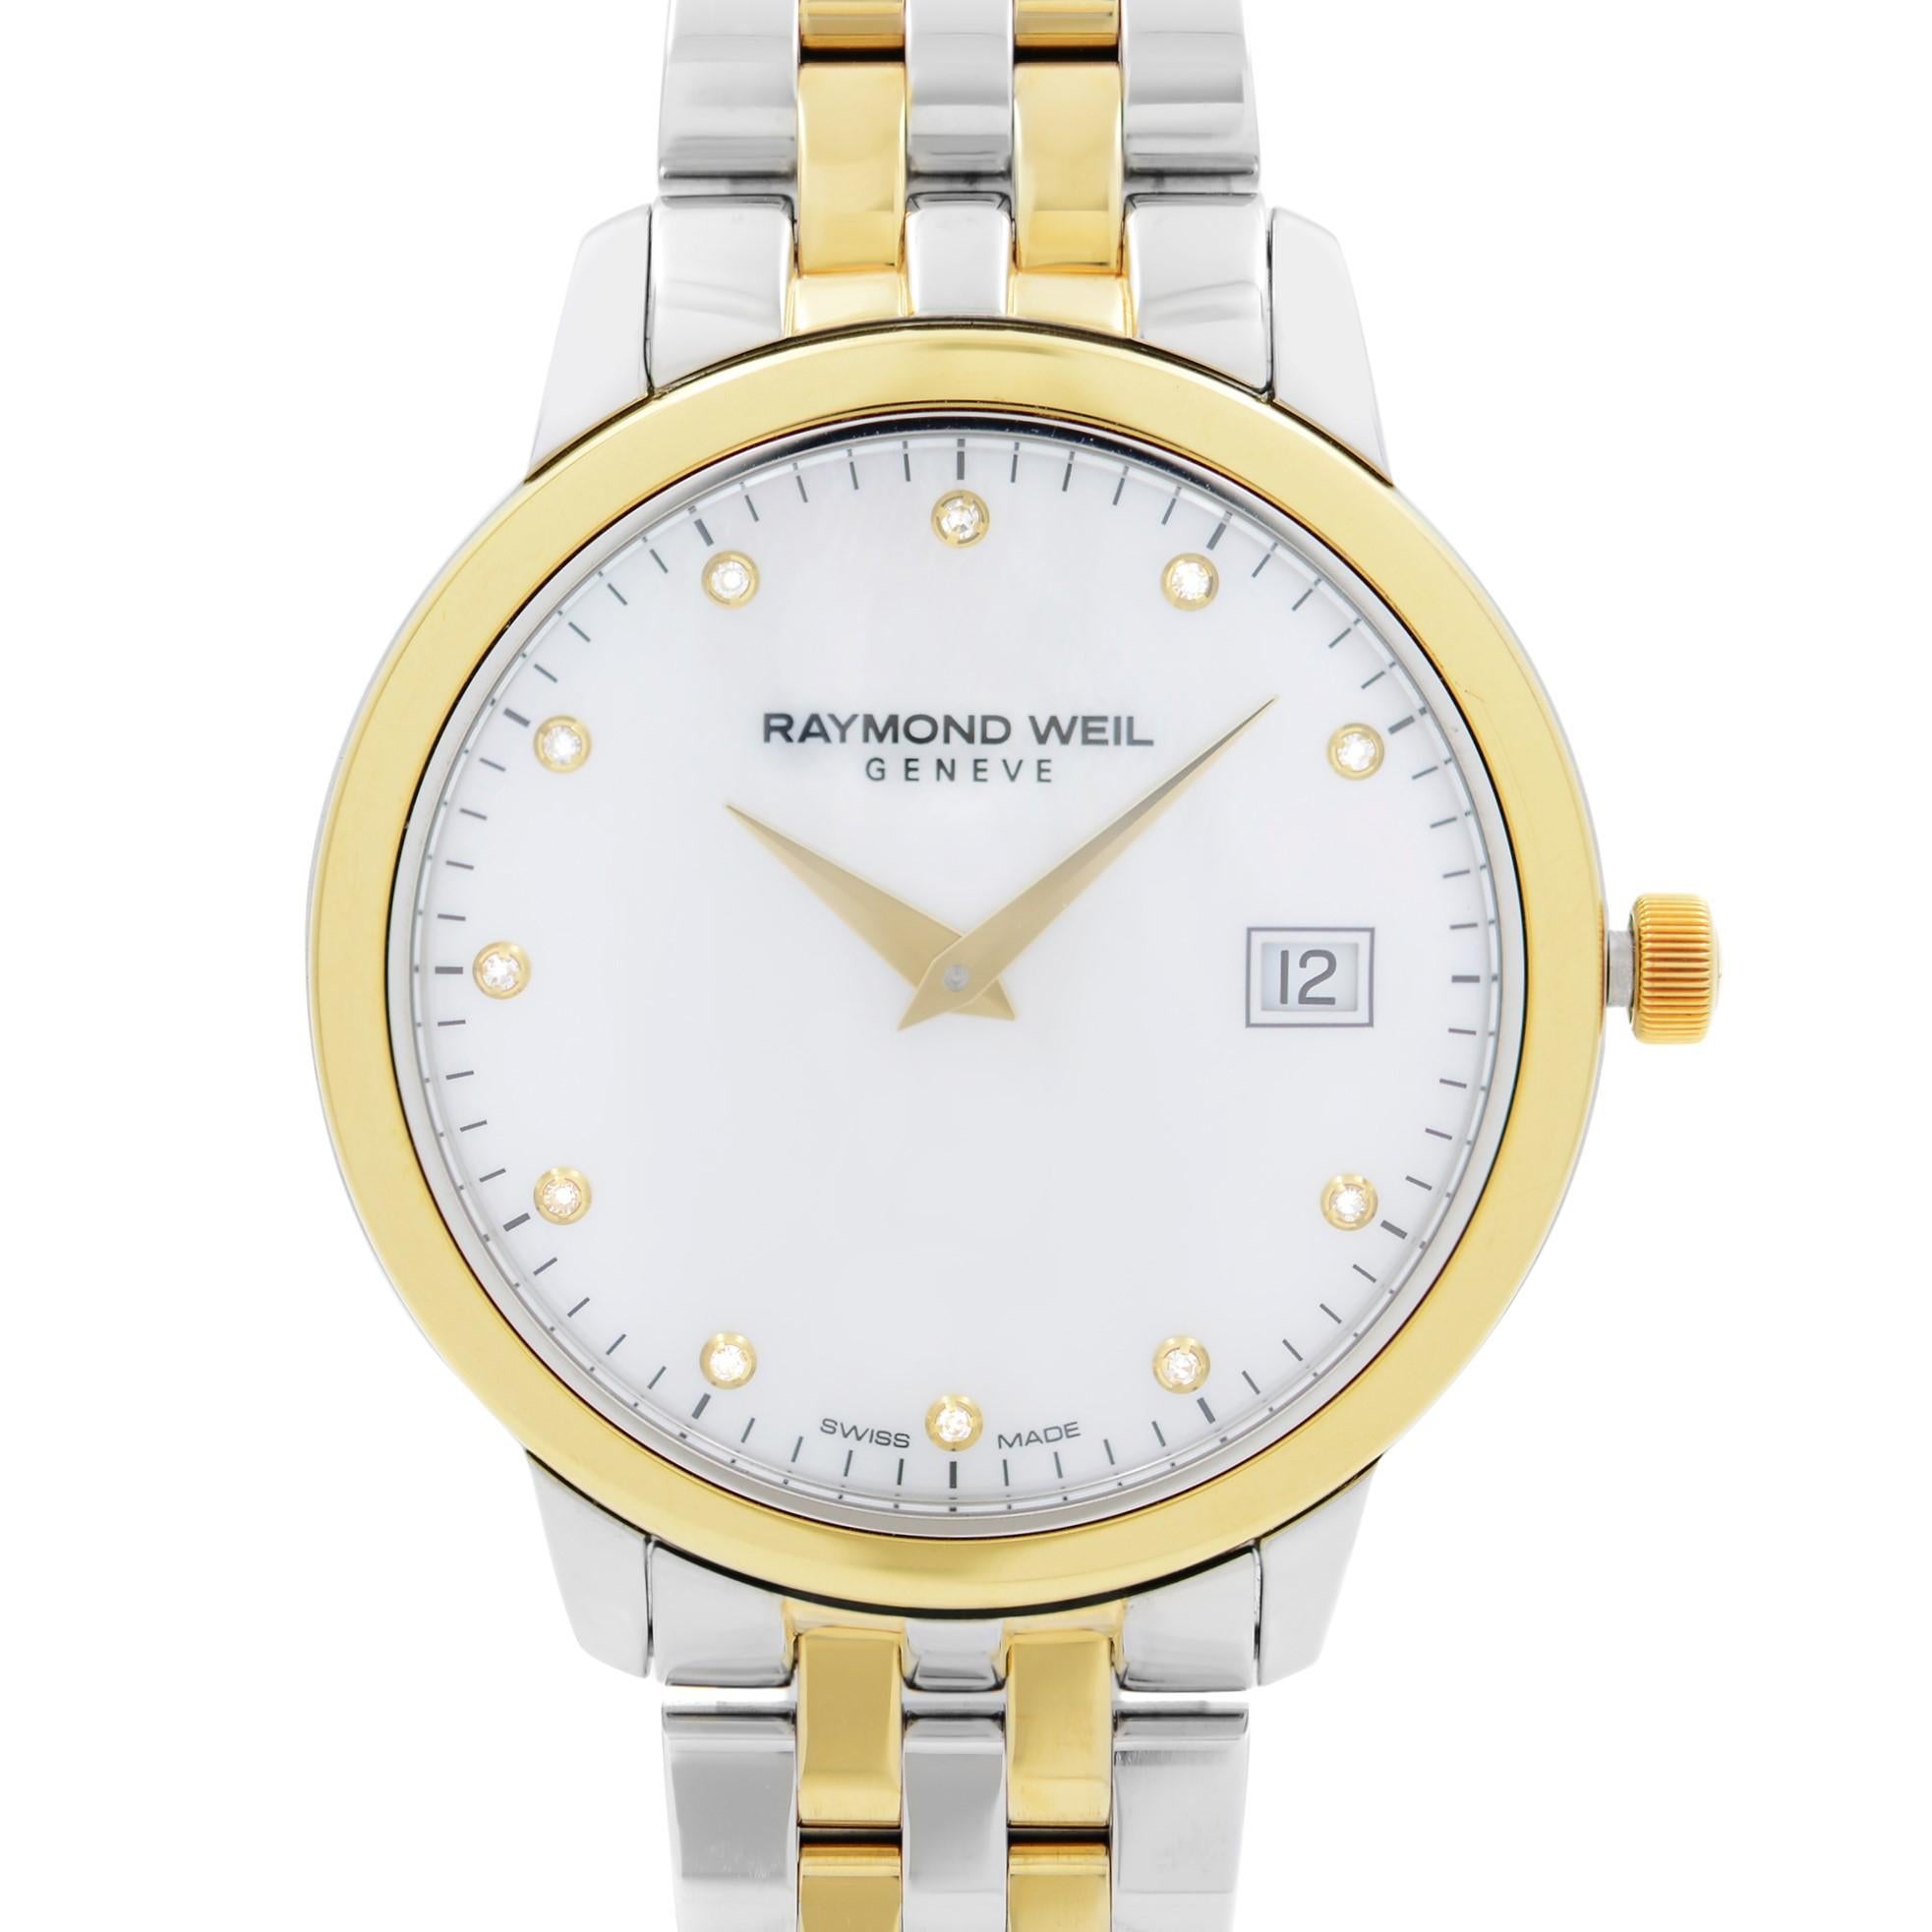 Store Display Model Never Worn. Can have minor blemishes or Missing tags and Stickers. Raymond Weil Toccata Two-Tone Steel Diamond MOP Dial Ladies Watch 5388-STP-97081. This Beautiful Timepiece Features: Stainless Steel Case with a Two-Tone (Silver